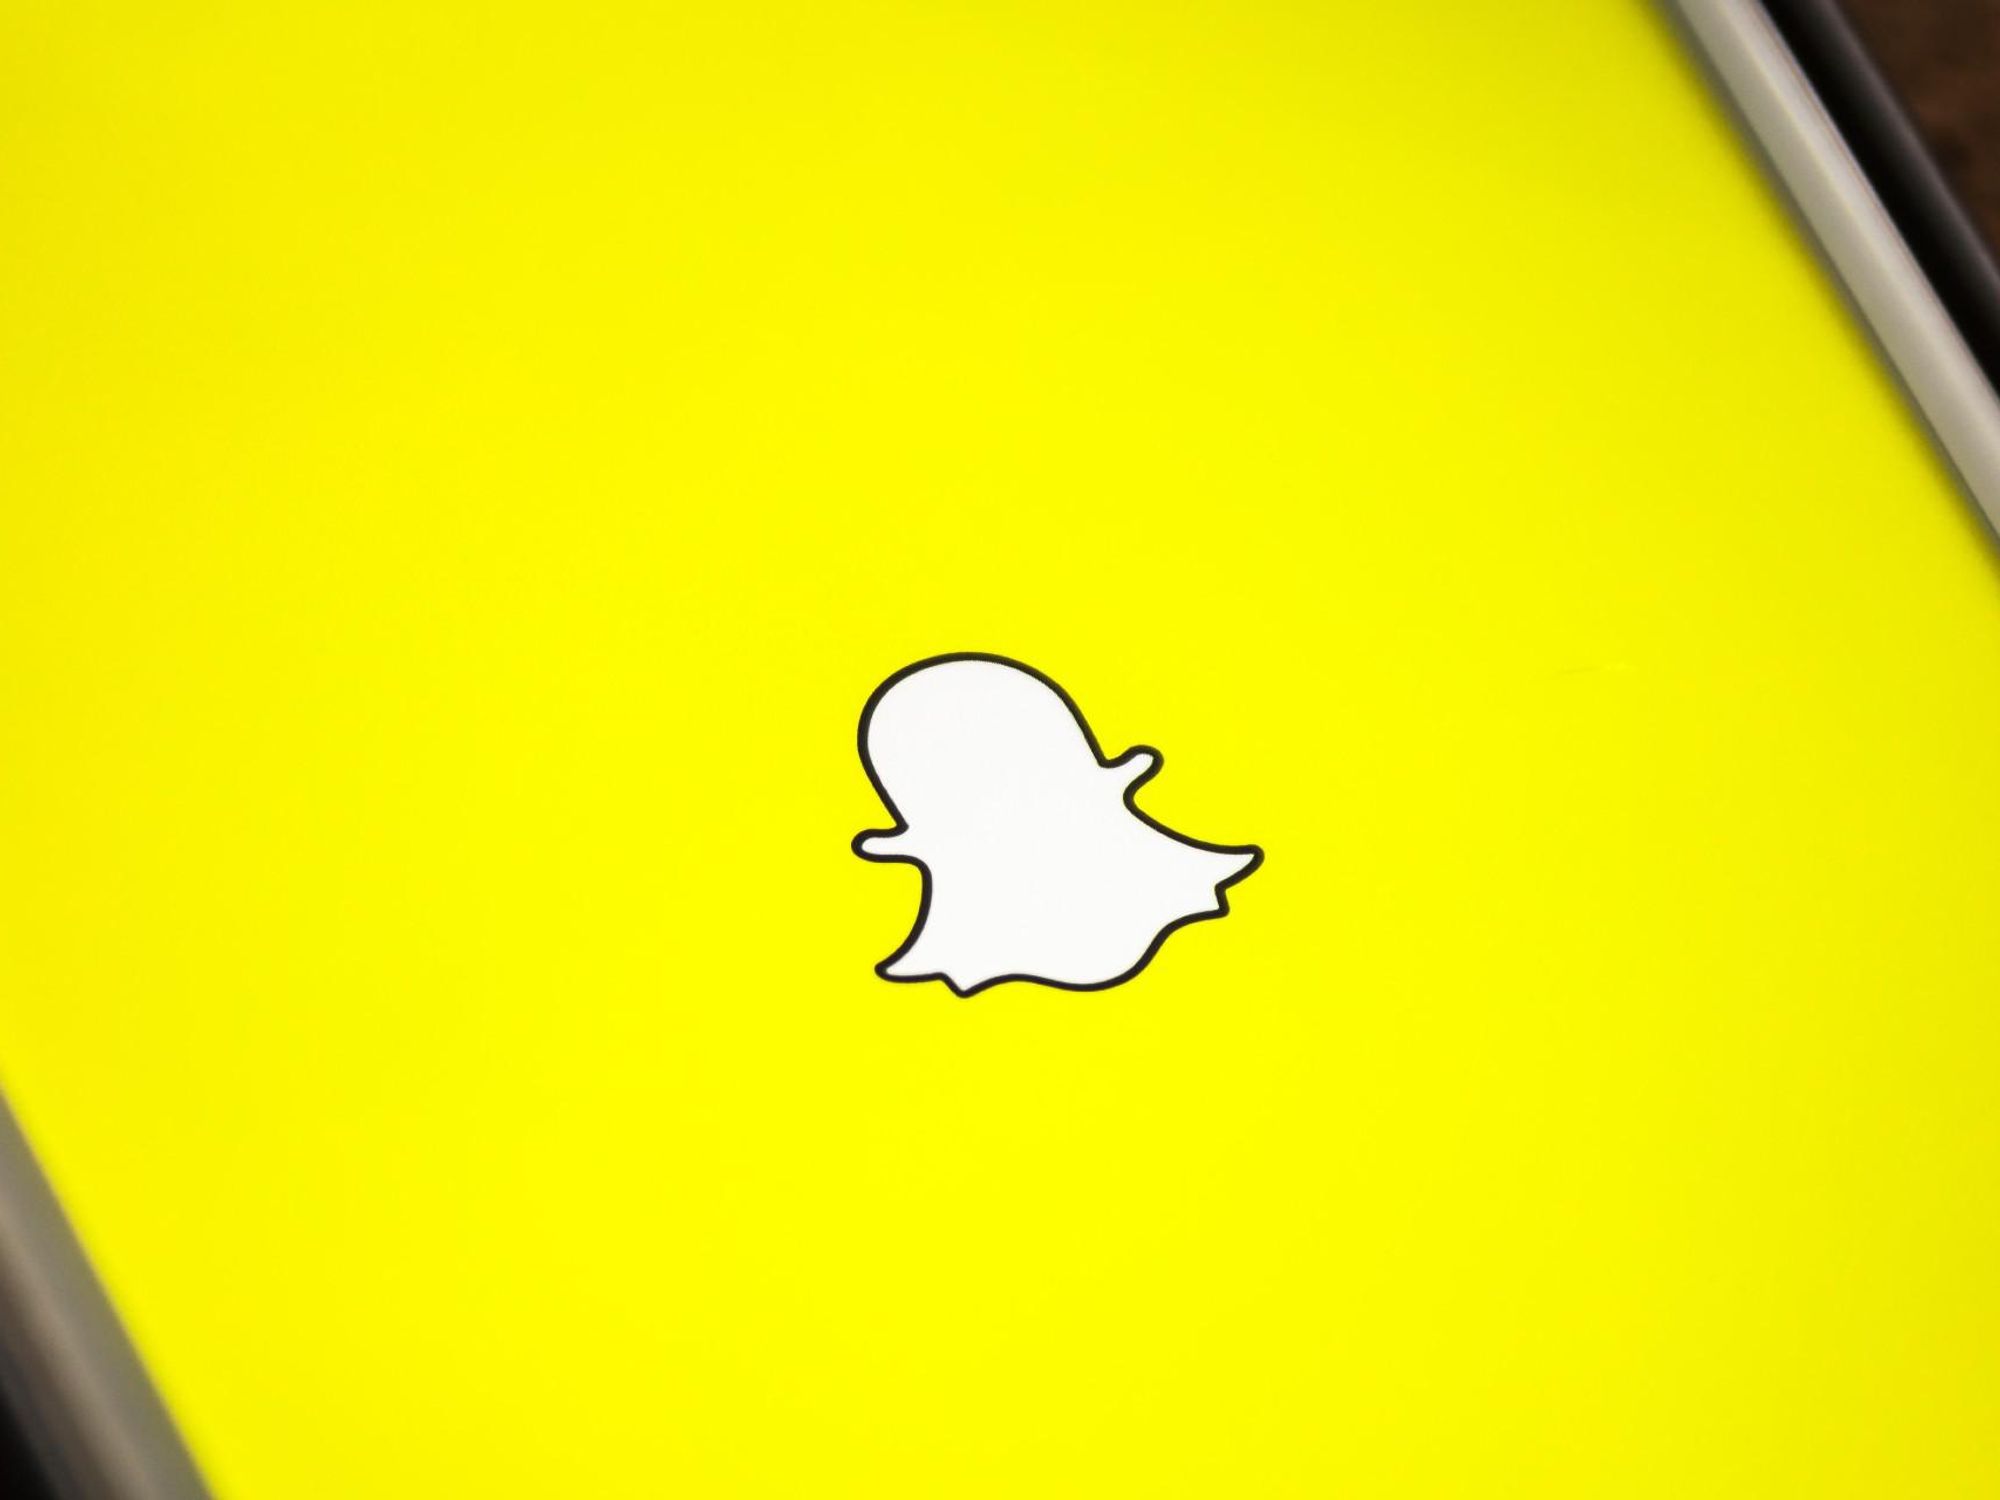 Snap Responds to Lawsuit by Suspending Two Partner Apps